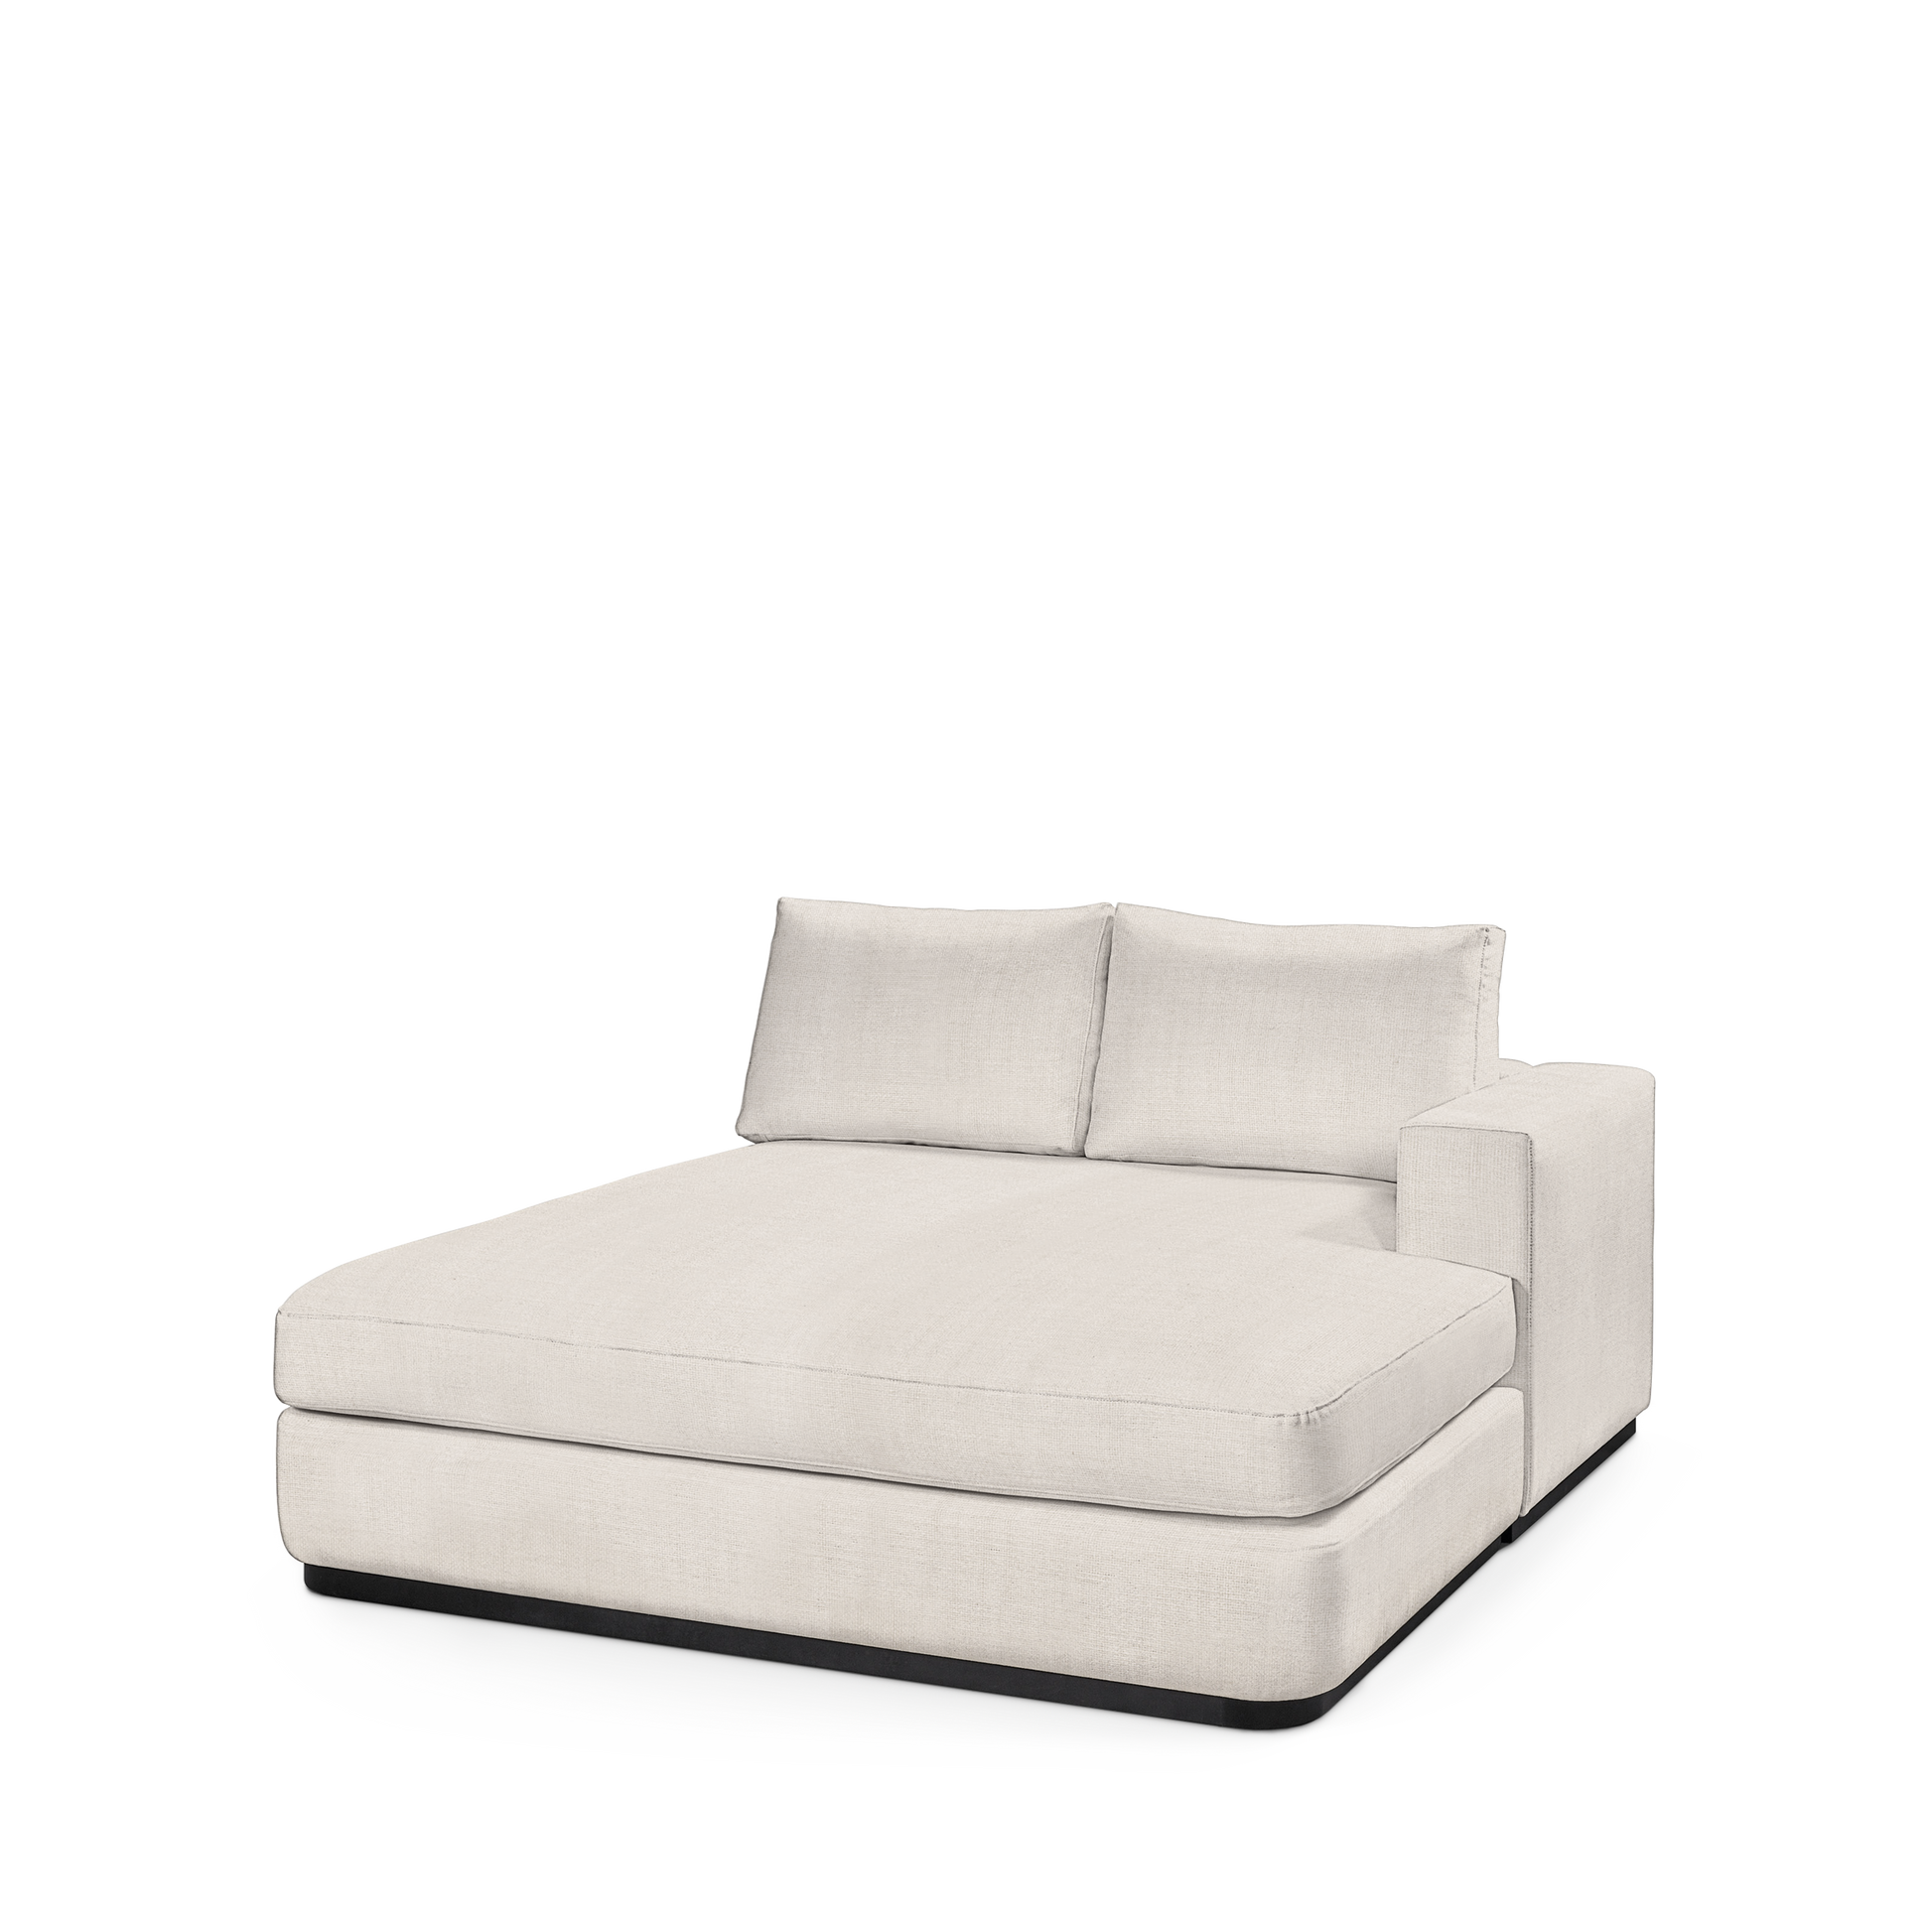 ATLAS 160 Lounge Bed arm rest right with light grey textile